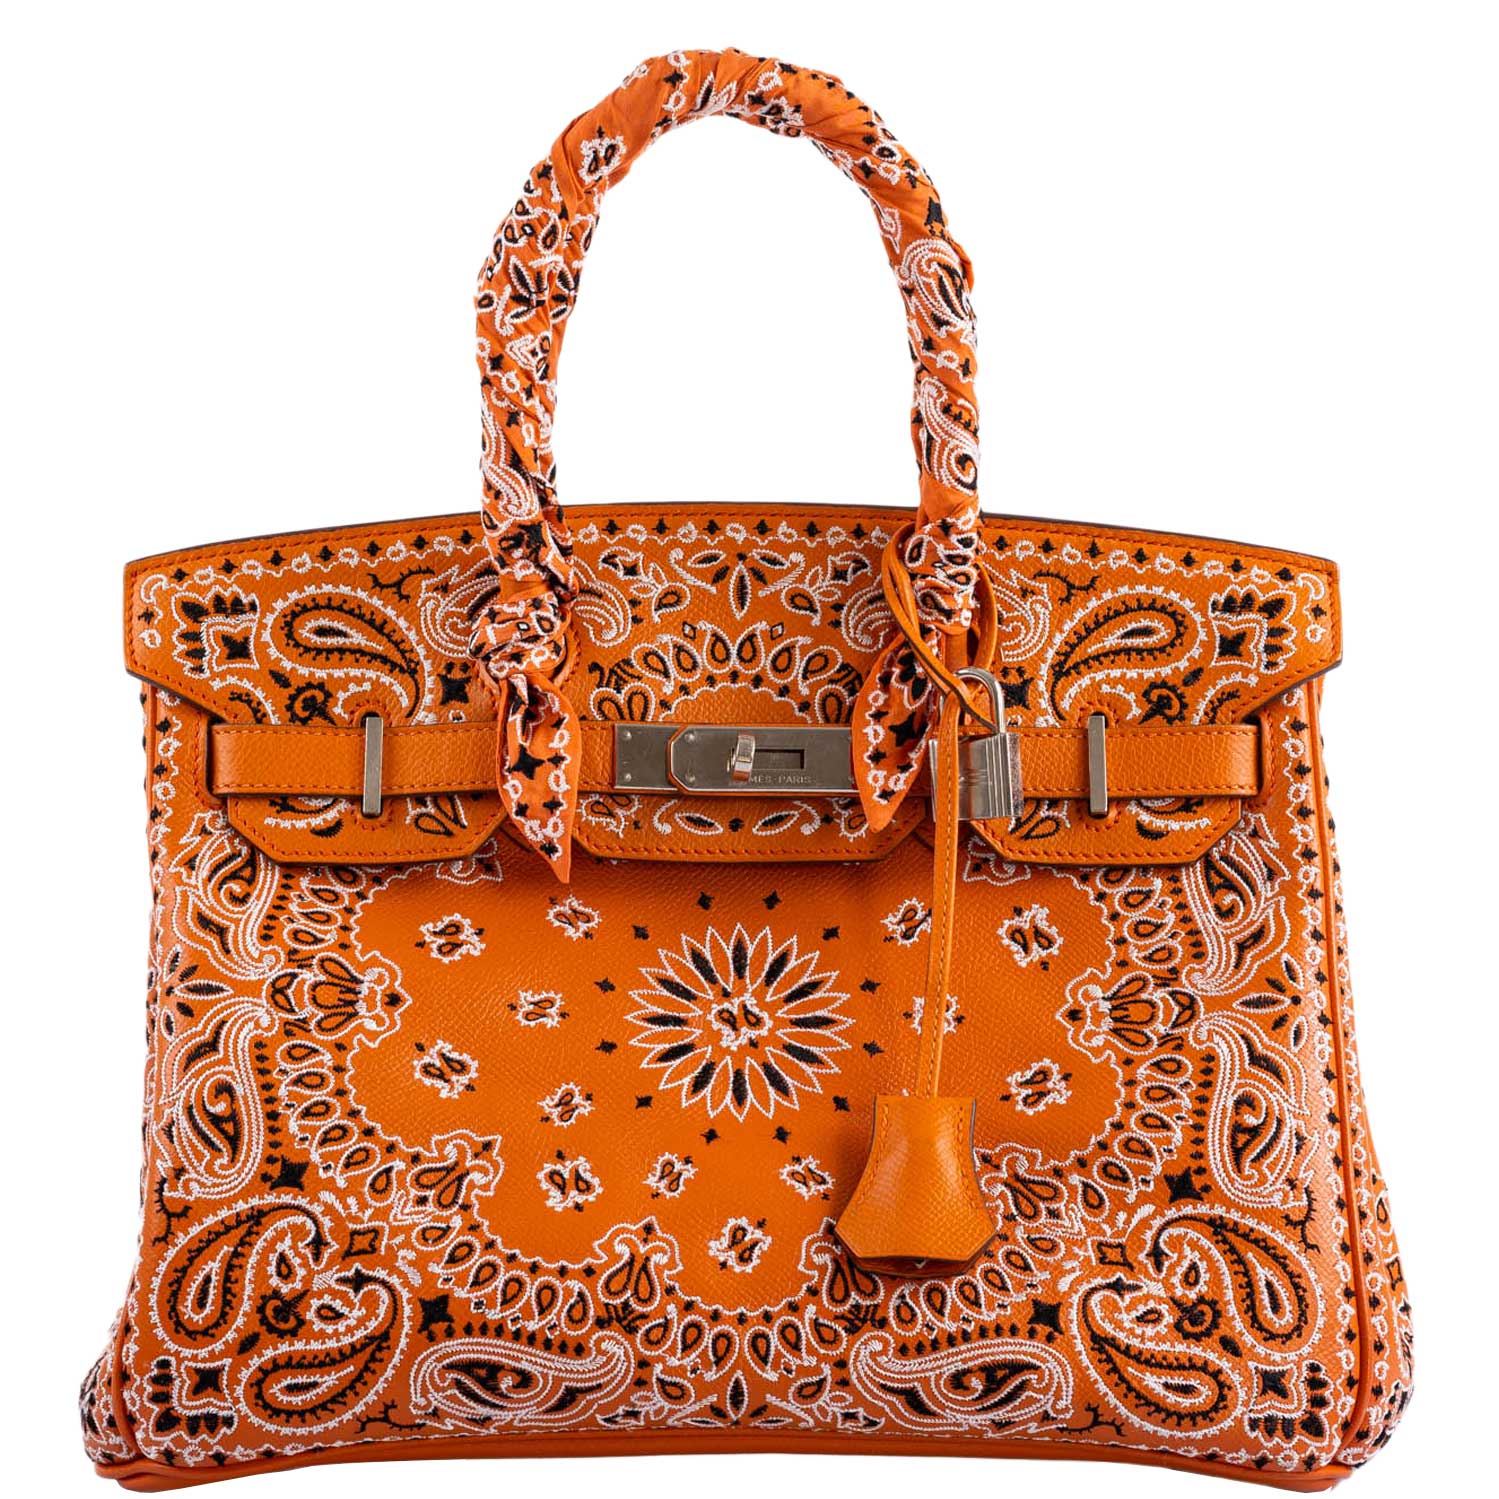 Connect Paris - The Vintage Iconic Hermes Bag by Jay Ahr